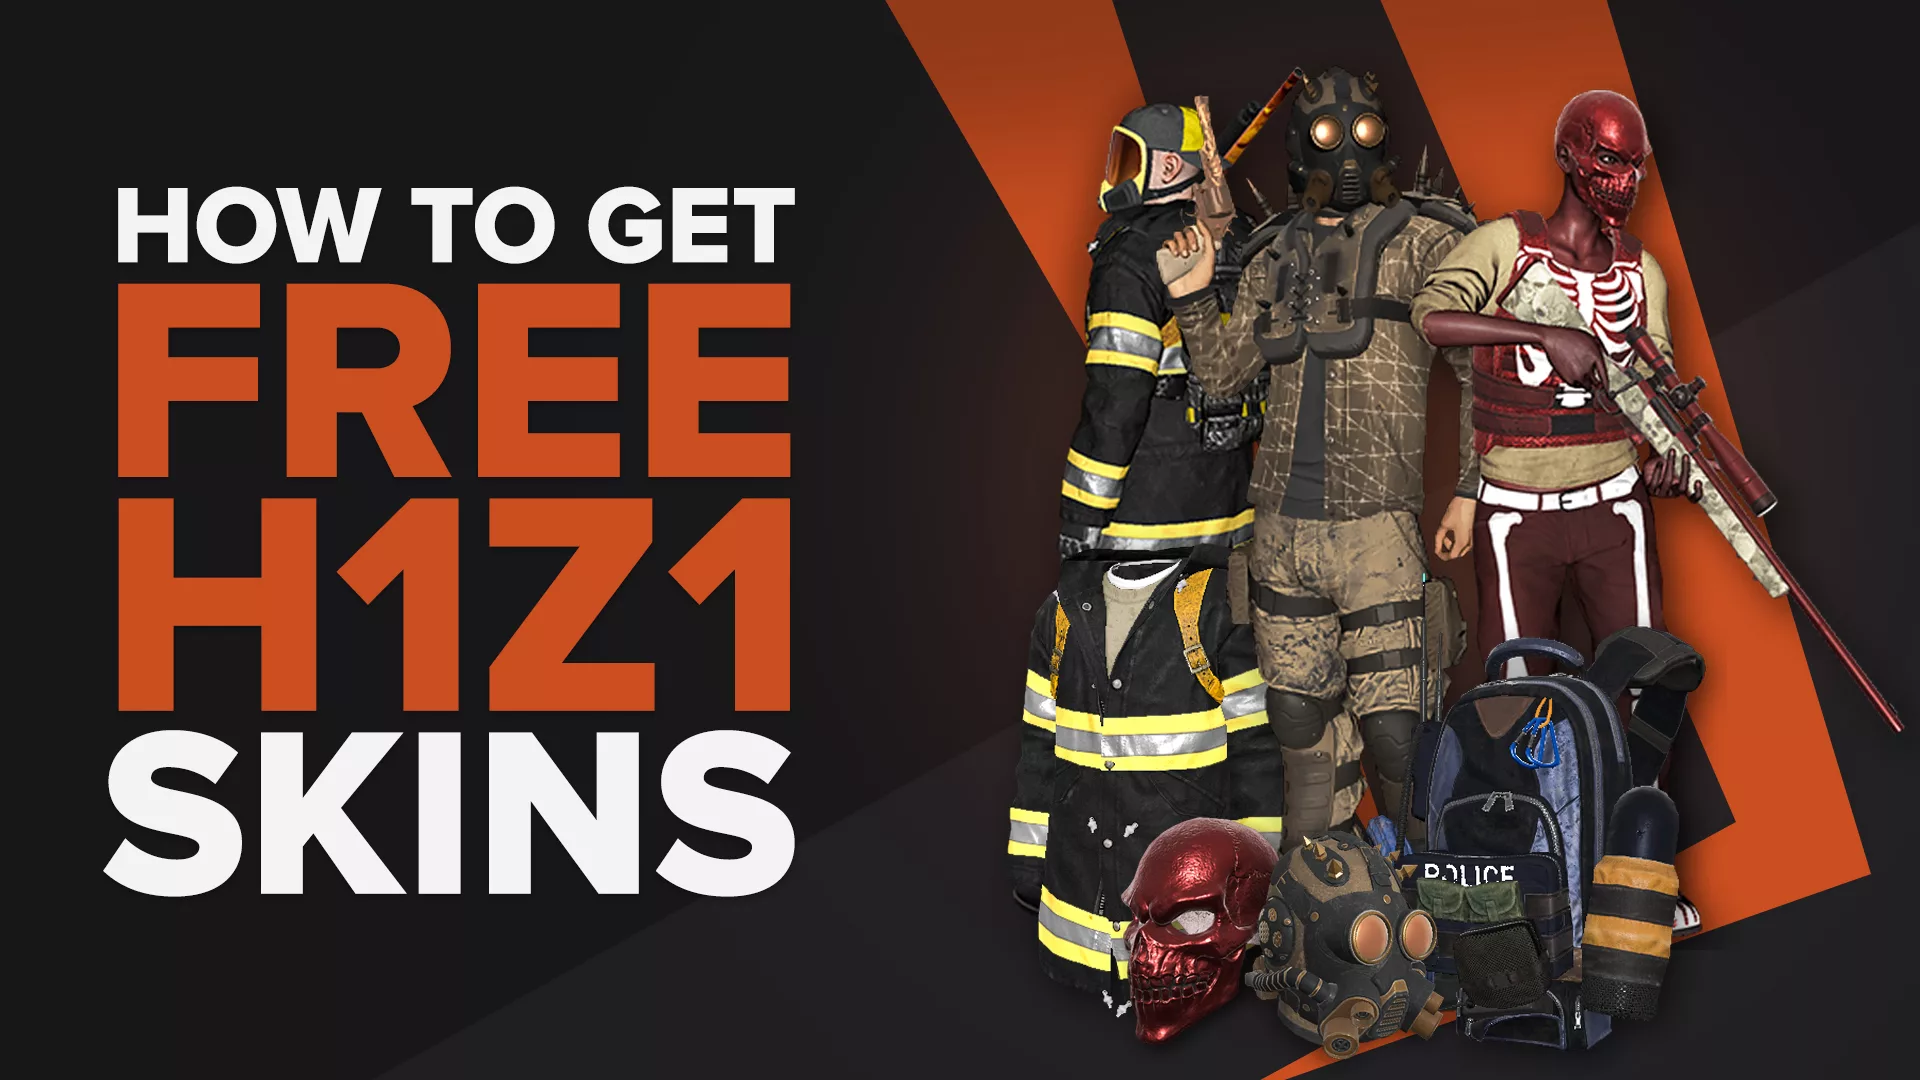 How To Get H1Z1 Skins and Crates For Free (3 Legit Ways)